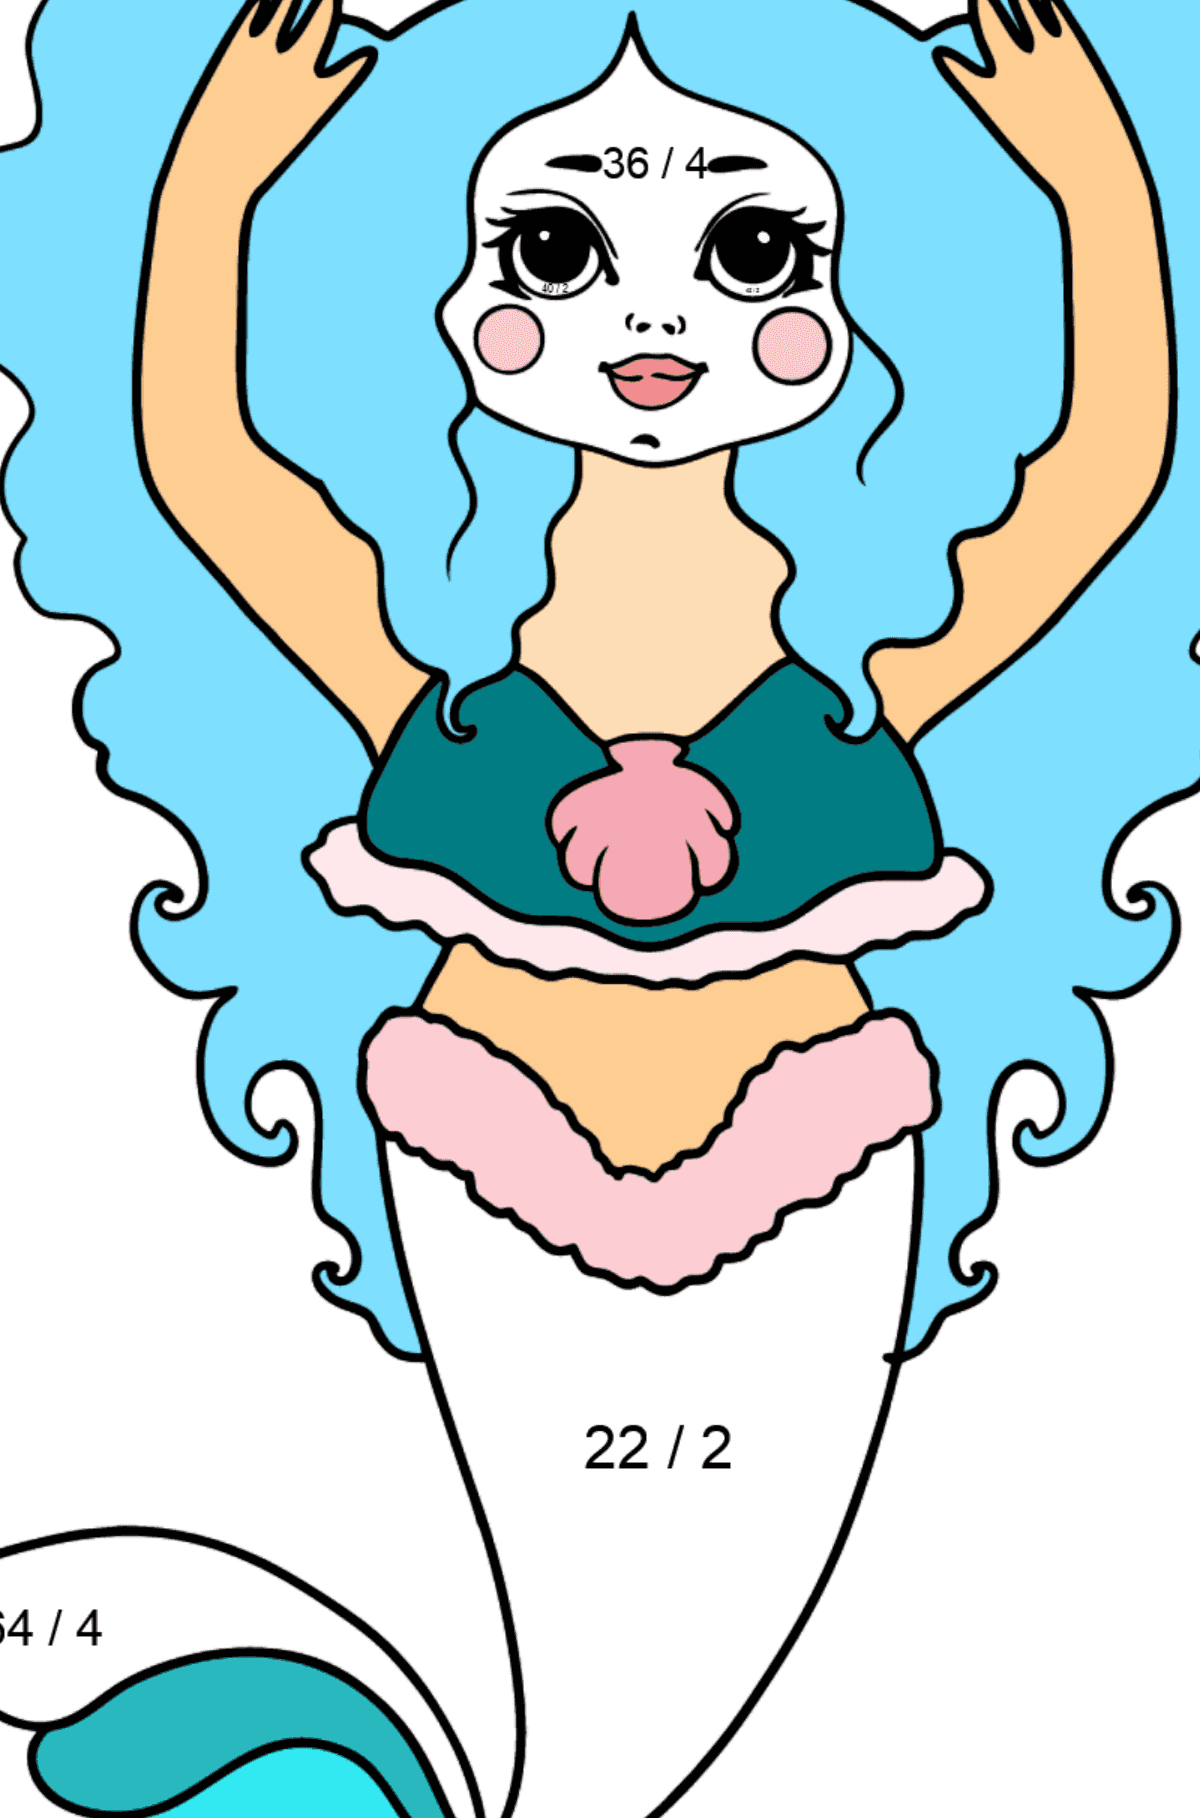 Mermaid with Blue Hair coloring page - Math Coloring - Division for Kids